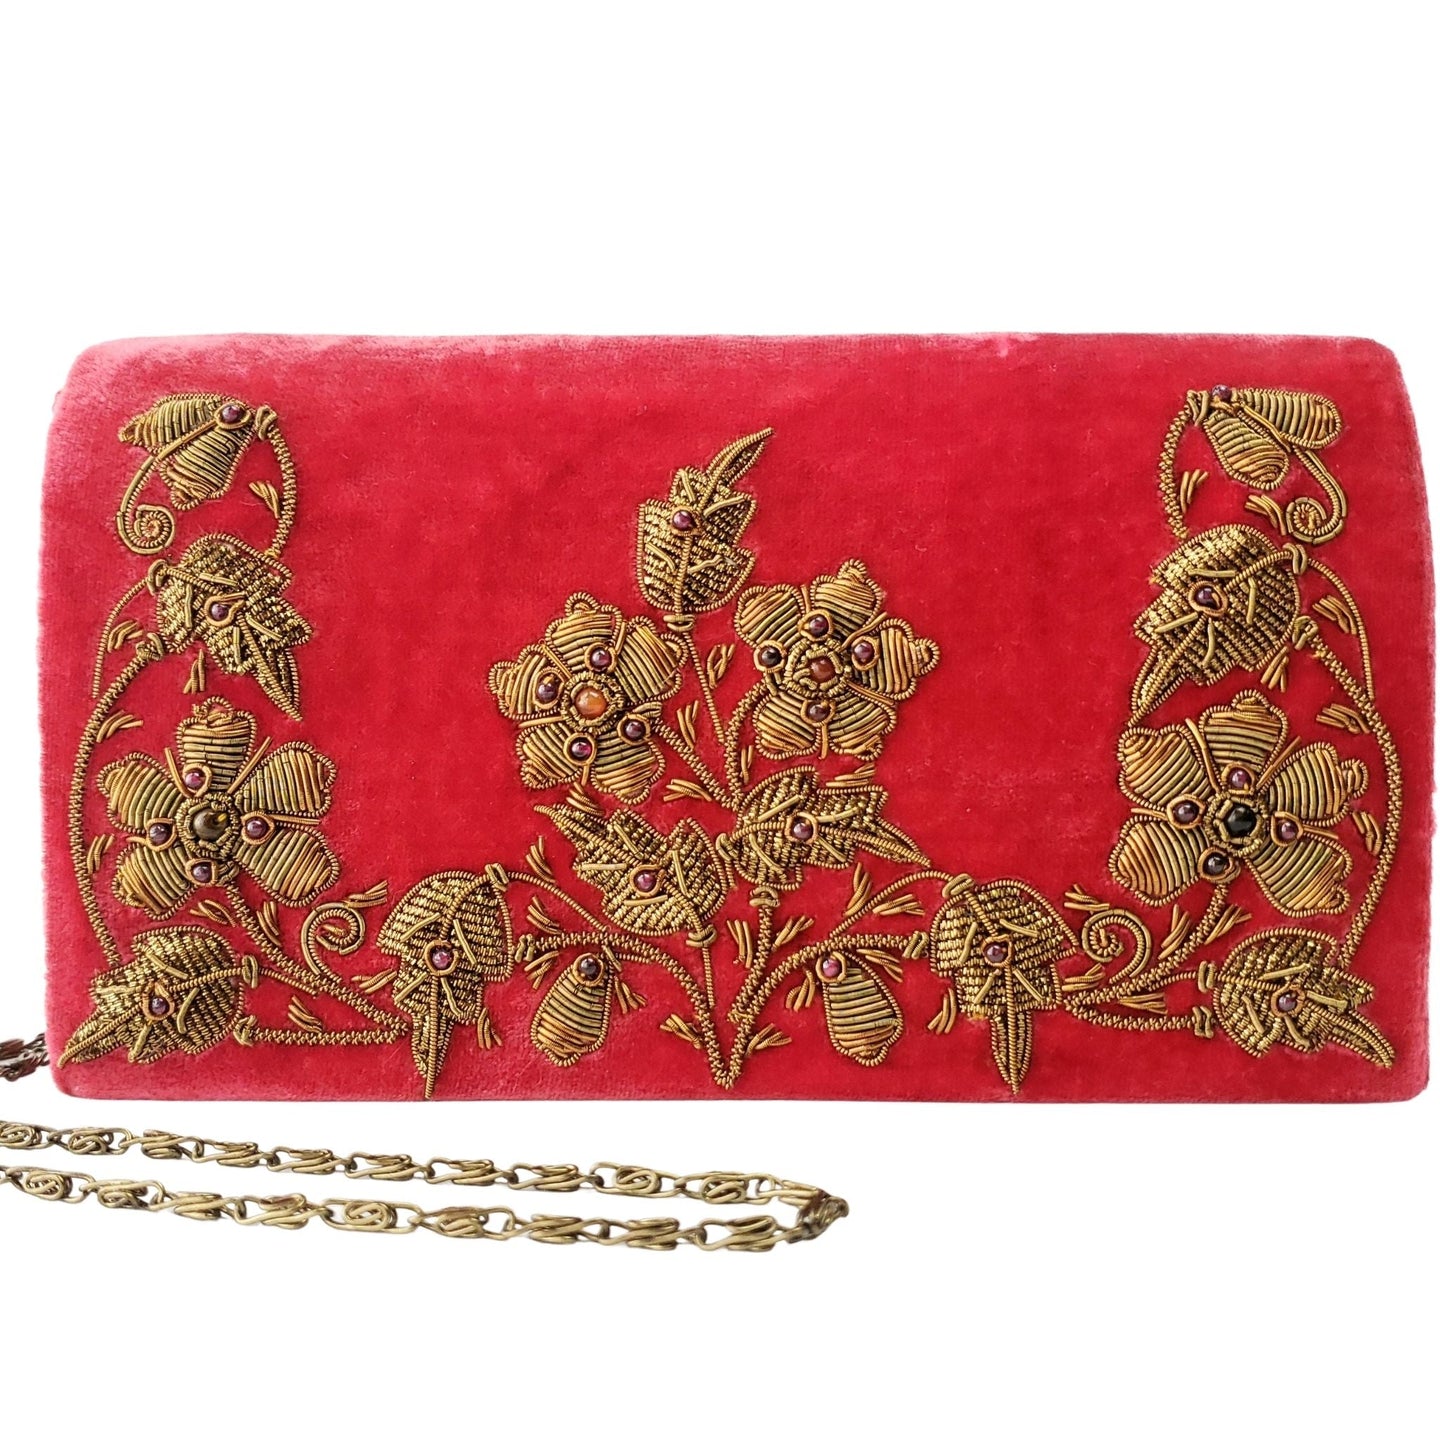 Vintage inspired red pink velvet clutch embroidered with copper flowers and inlaid with gemstones.